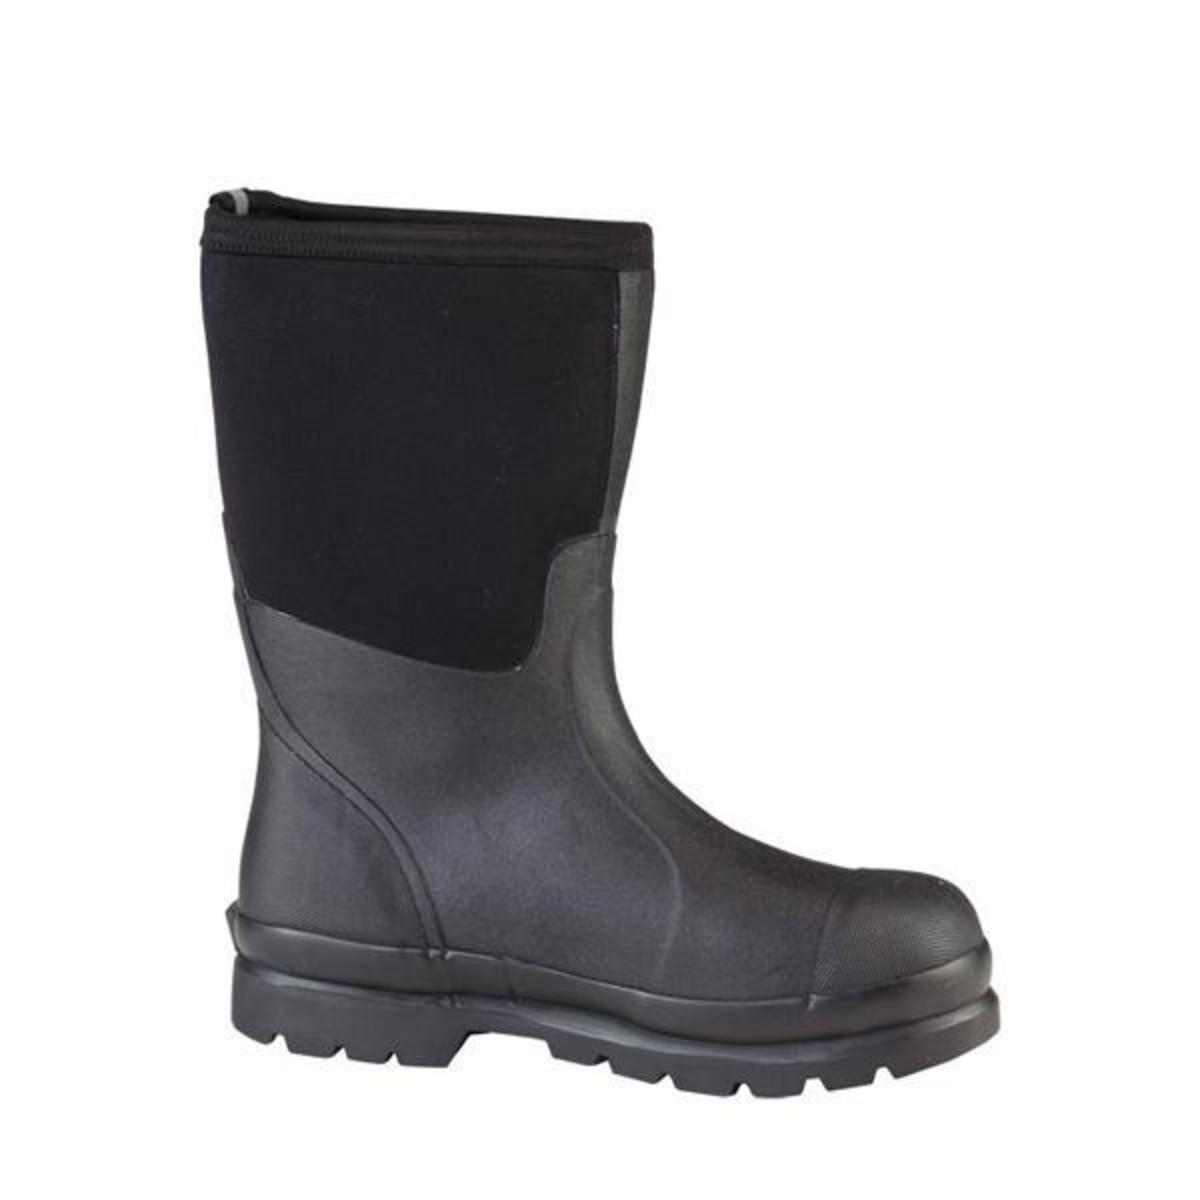 mens insulated slip on boots